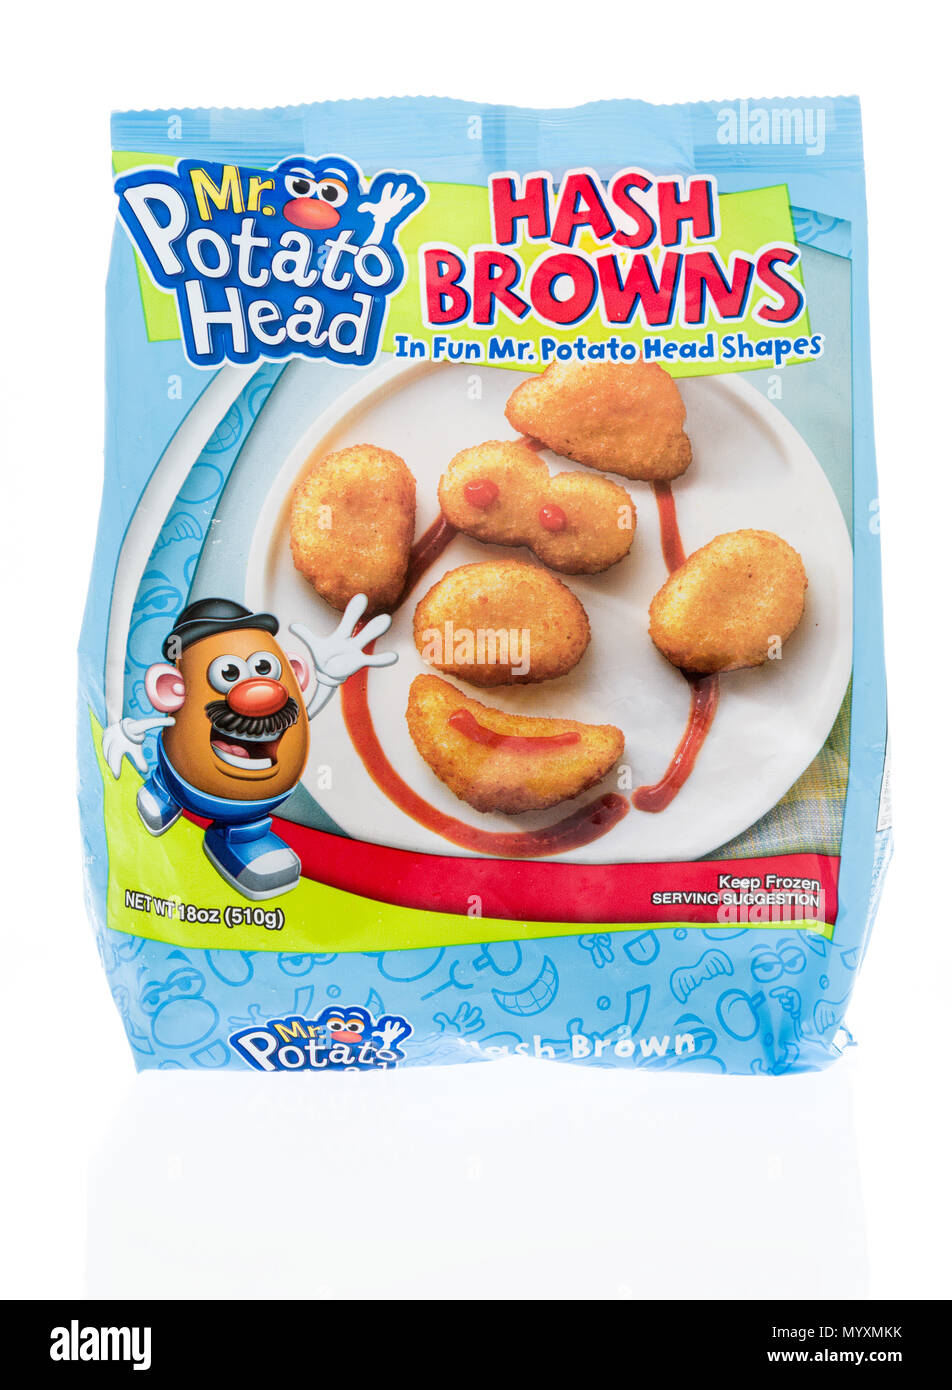 Winneconne - 1 June 2018: A bag of Mr. Potato Head hash browns with head shapes on an isolated background. Stock Photo